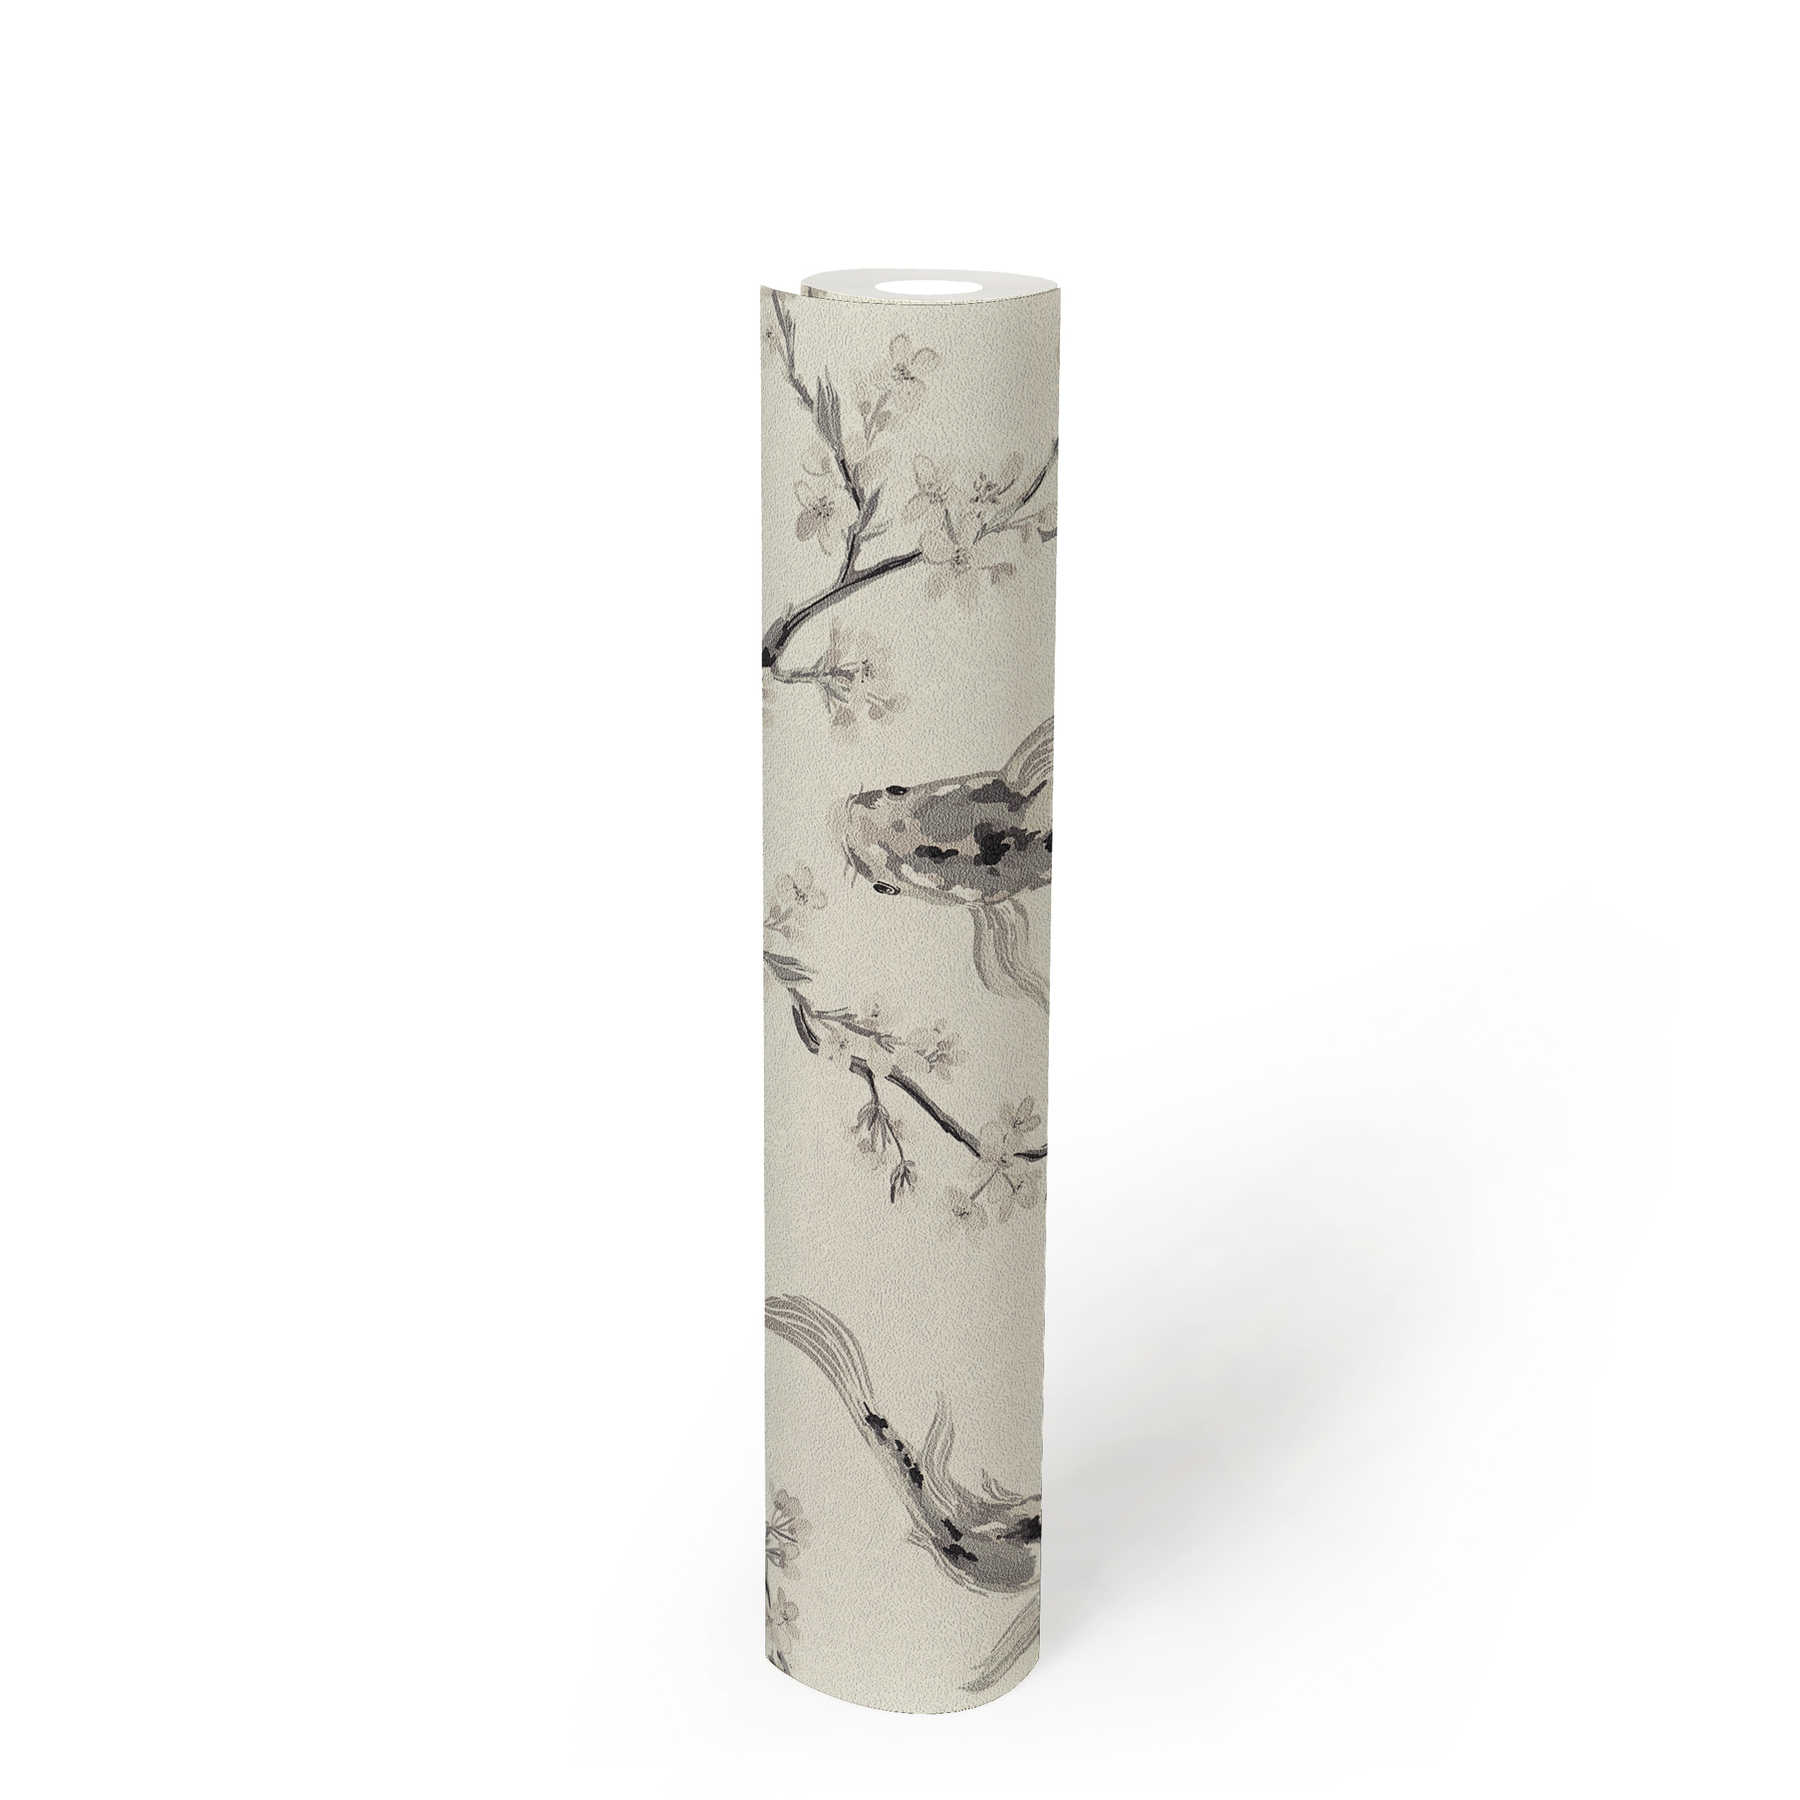             Non-woven wallpaper with koi pattern in Asian style - grey, beige, cream
        